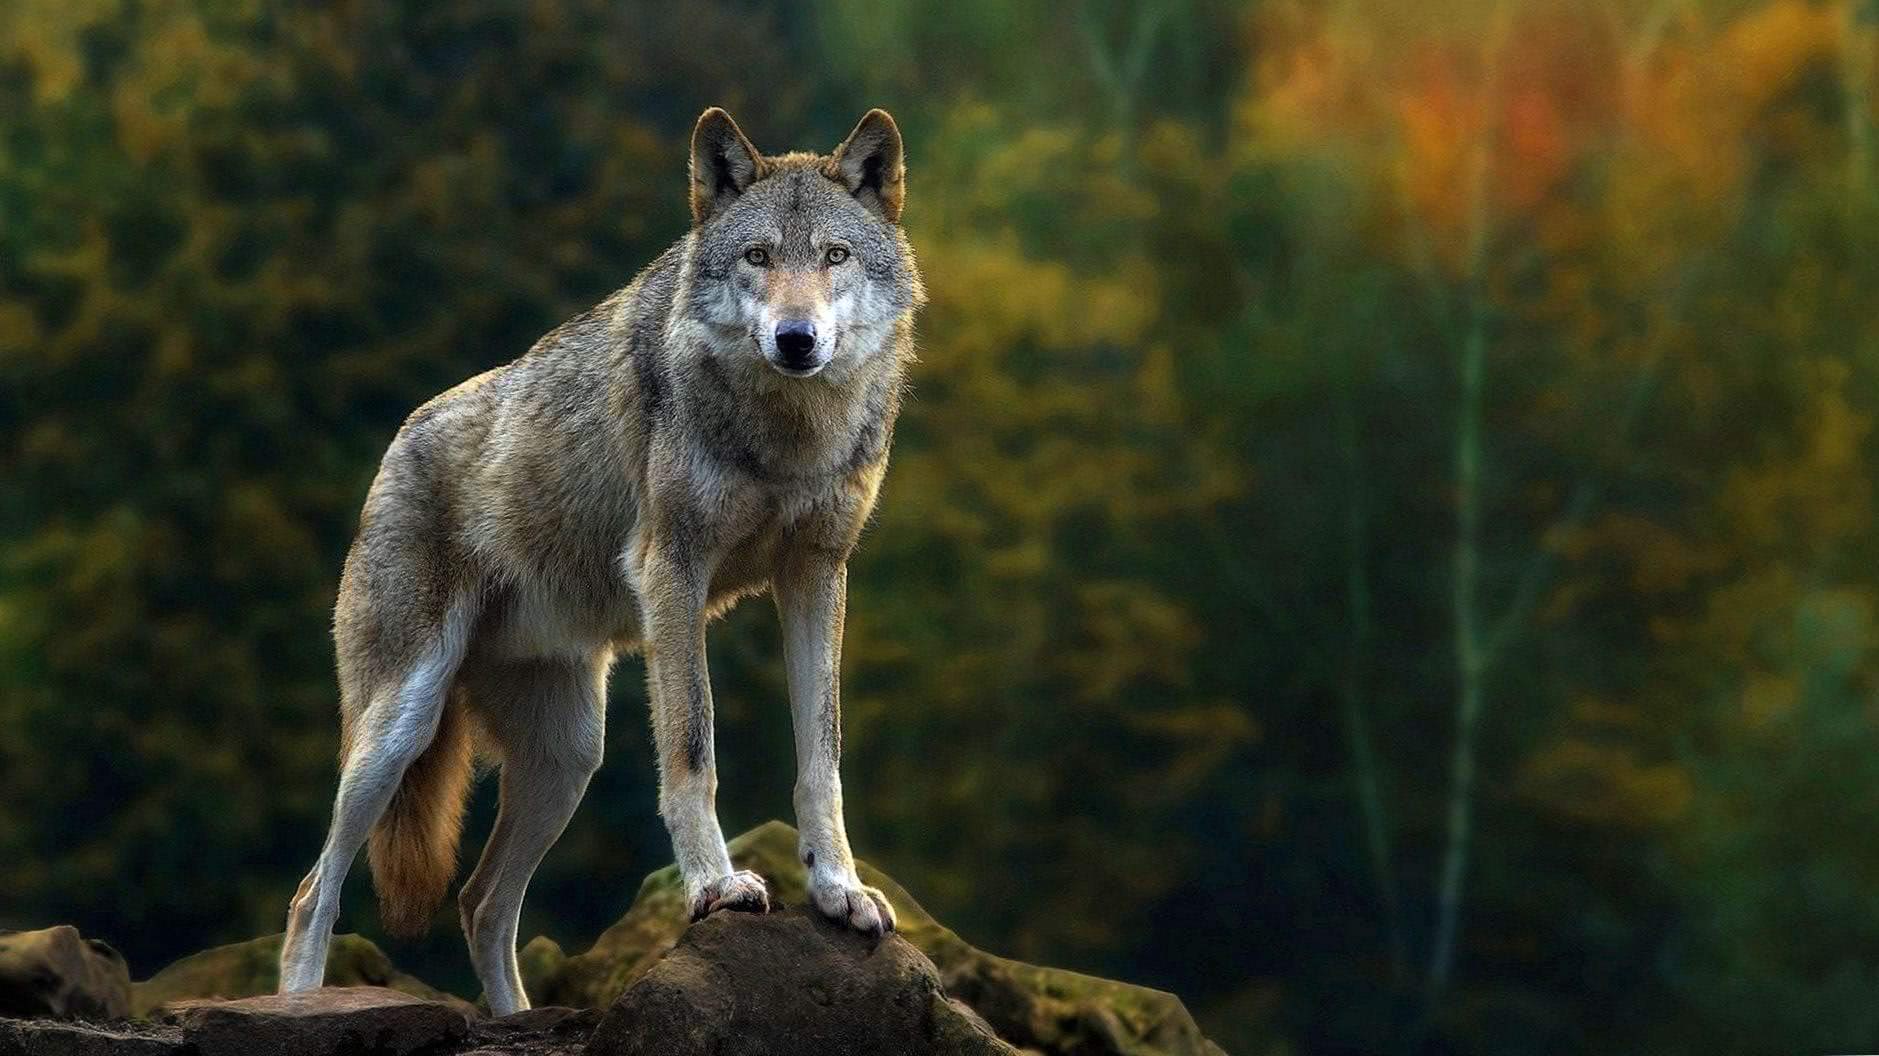 1920×1080 wallpaper hd wolf background image 2